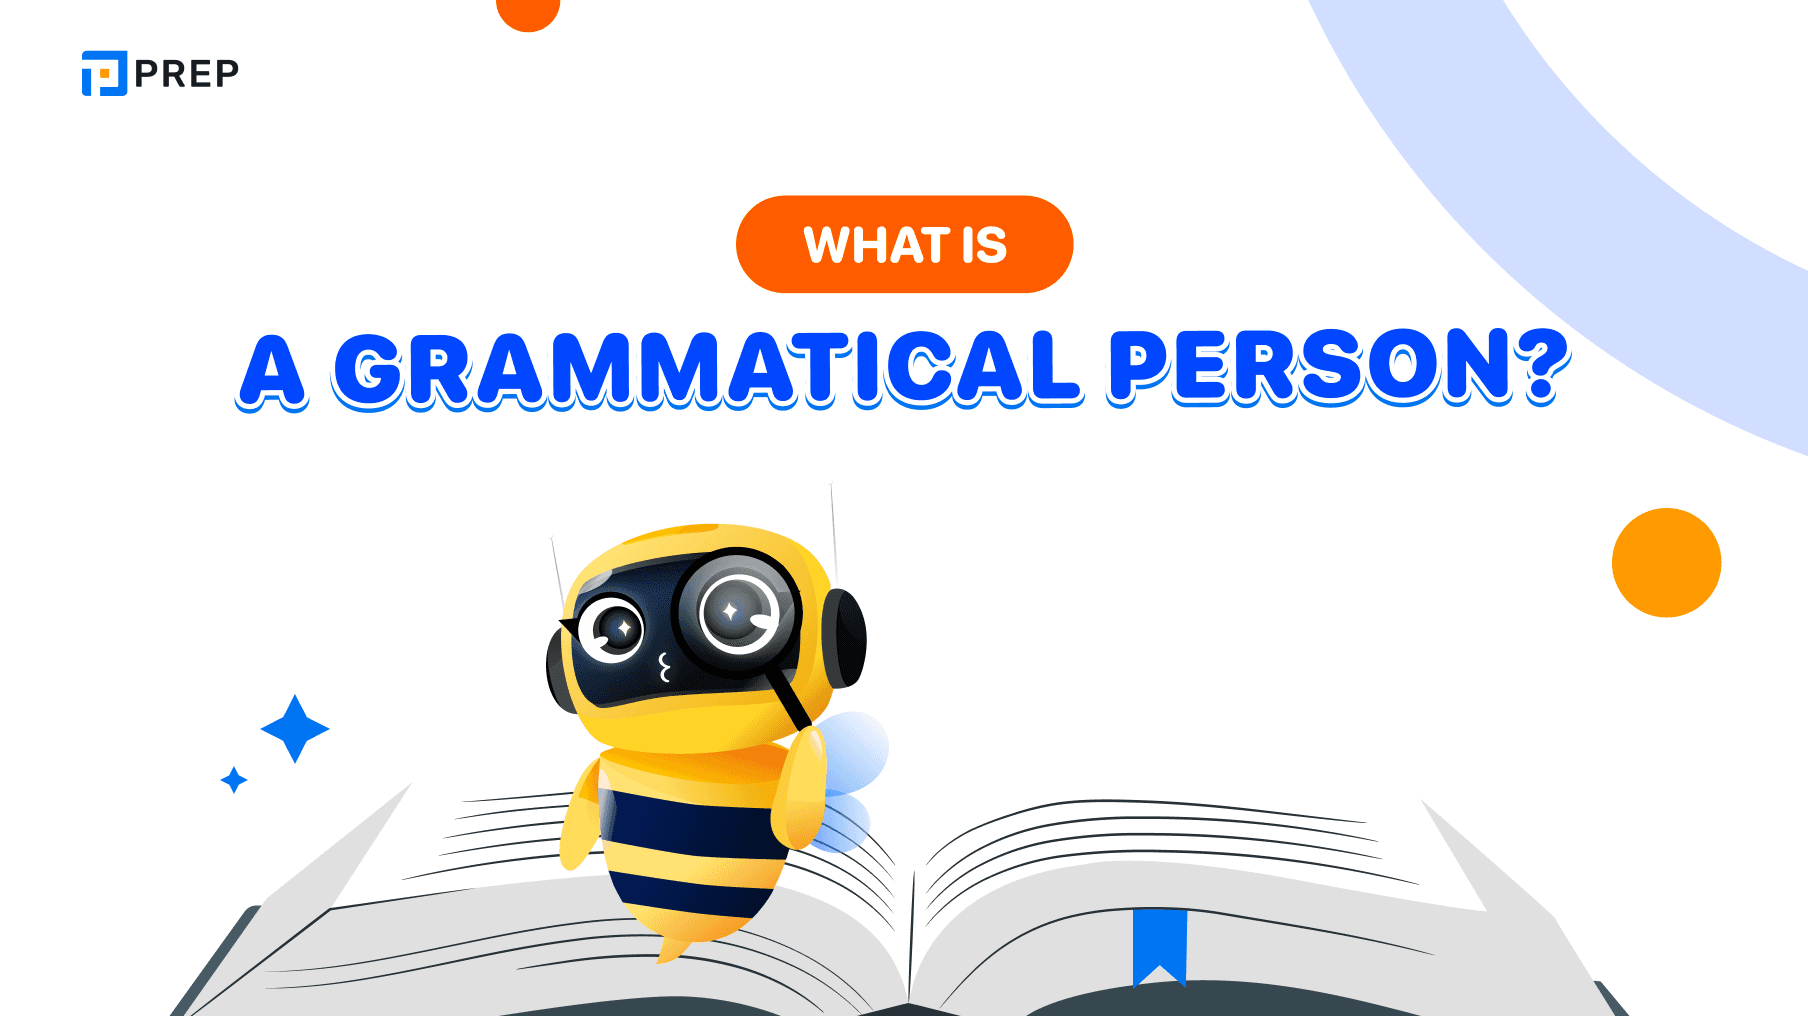 Grammatical persons in English: first person, second person, third person